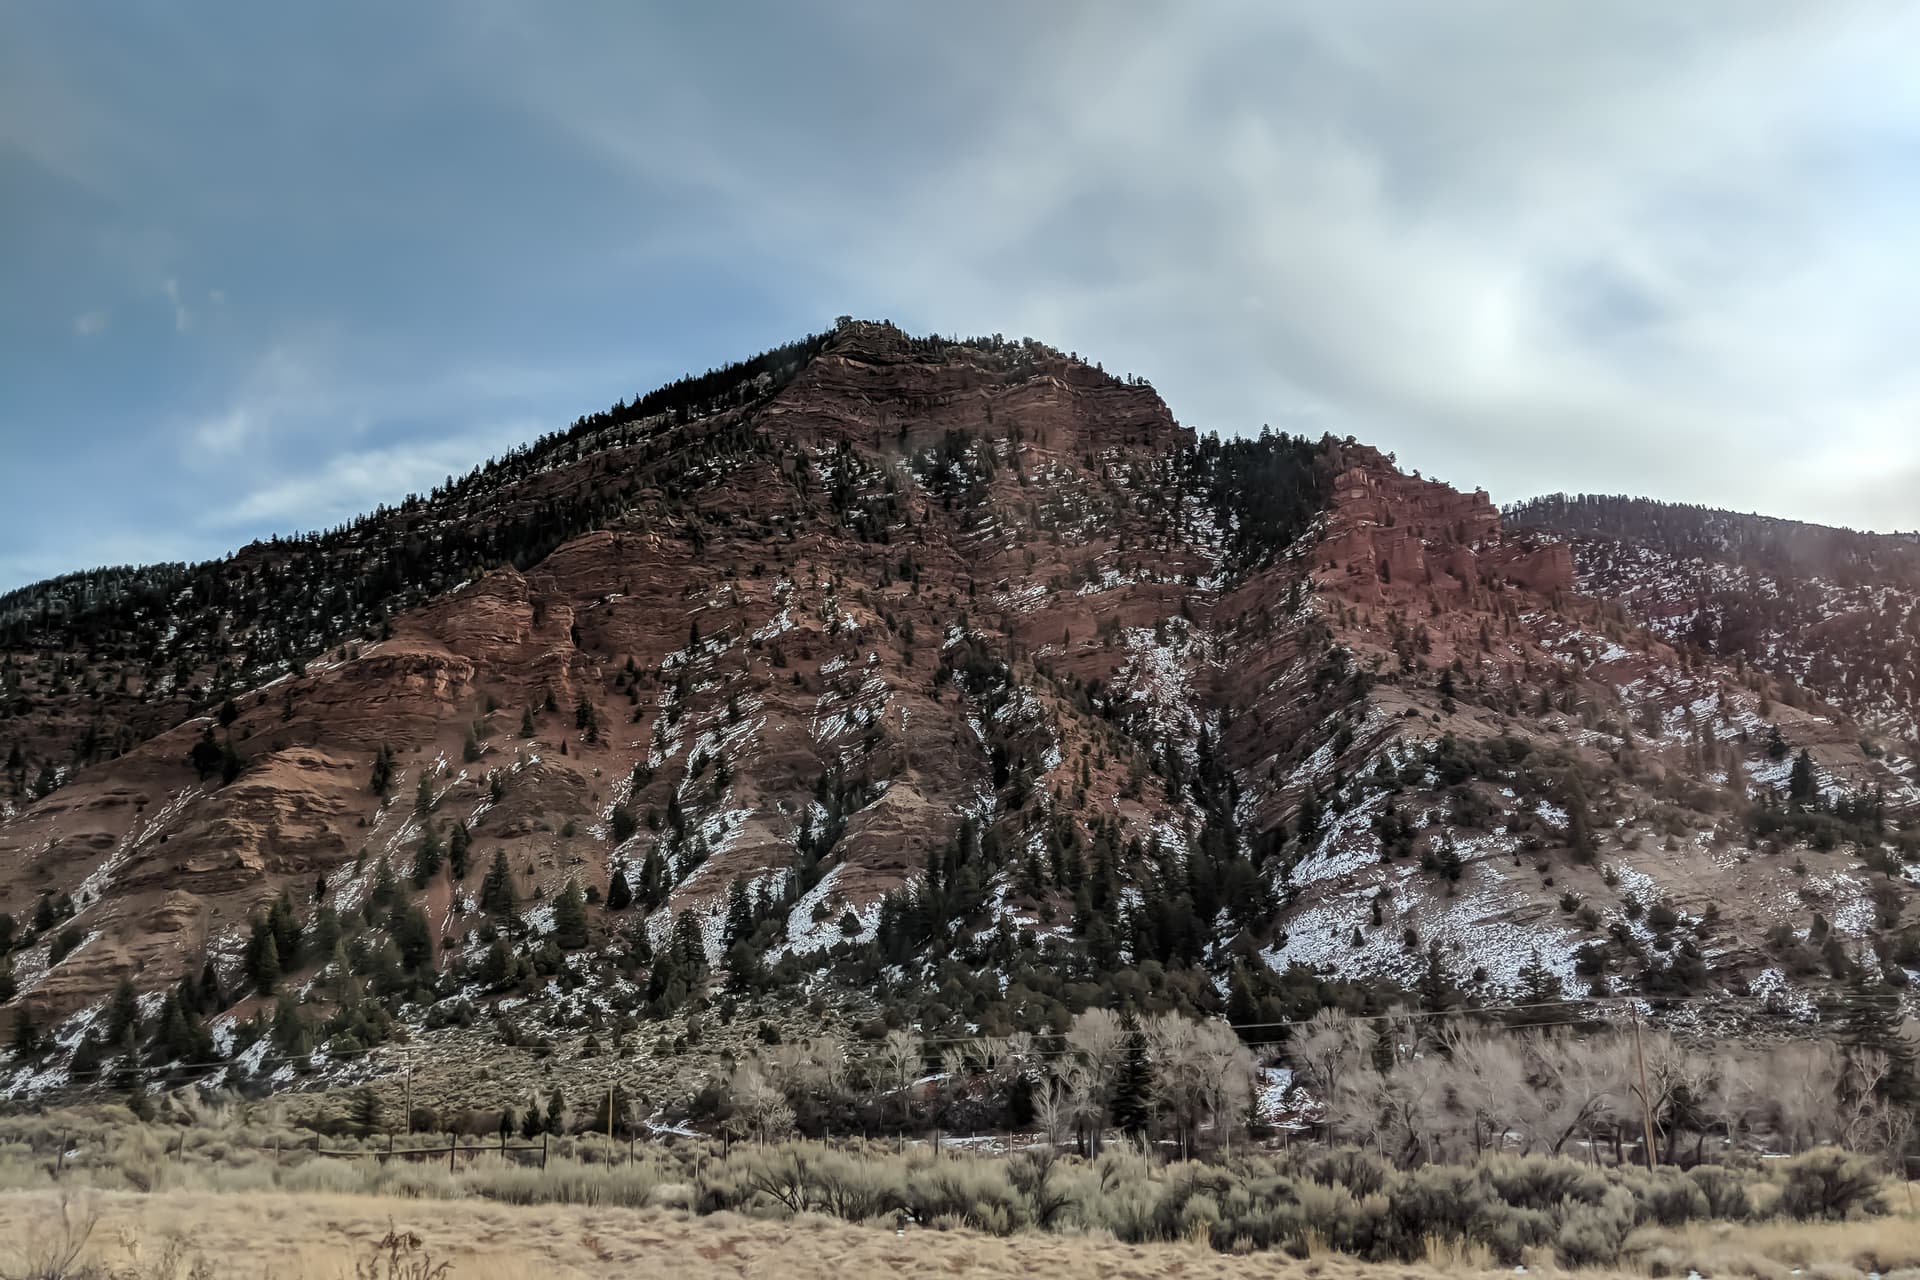 A small peak of red stone next to a mountain highway. Despite obviously being a winter scene, there is remarkably little snow on the ground.